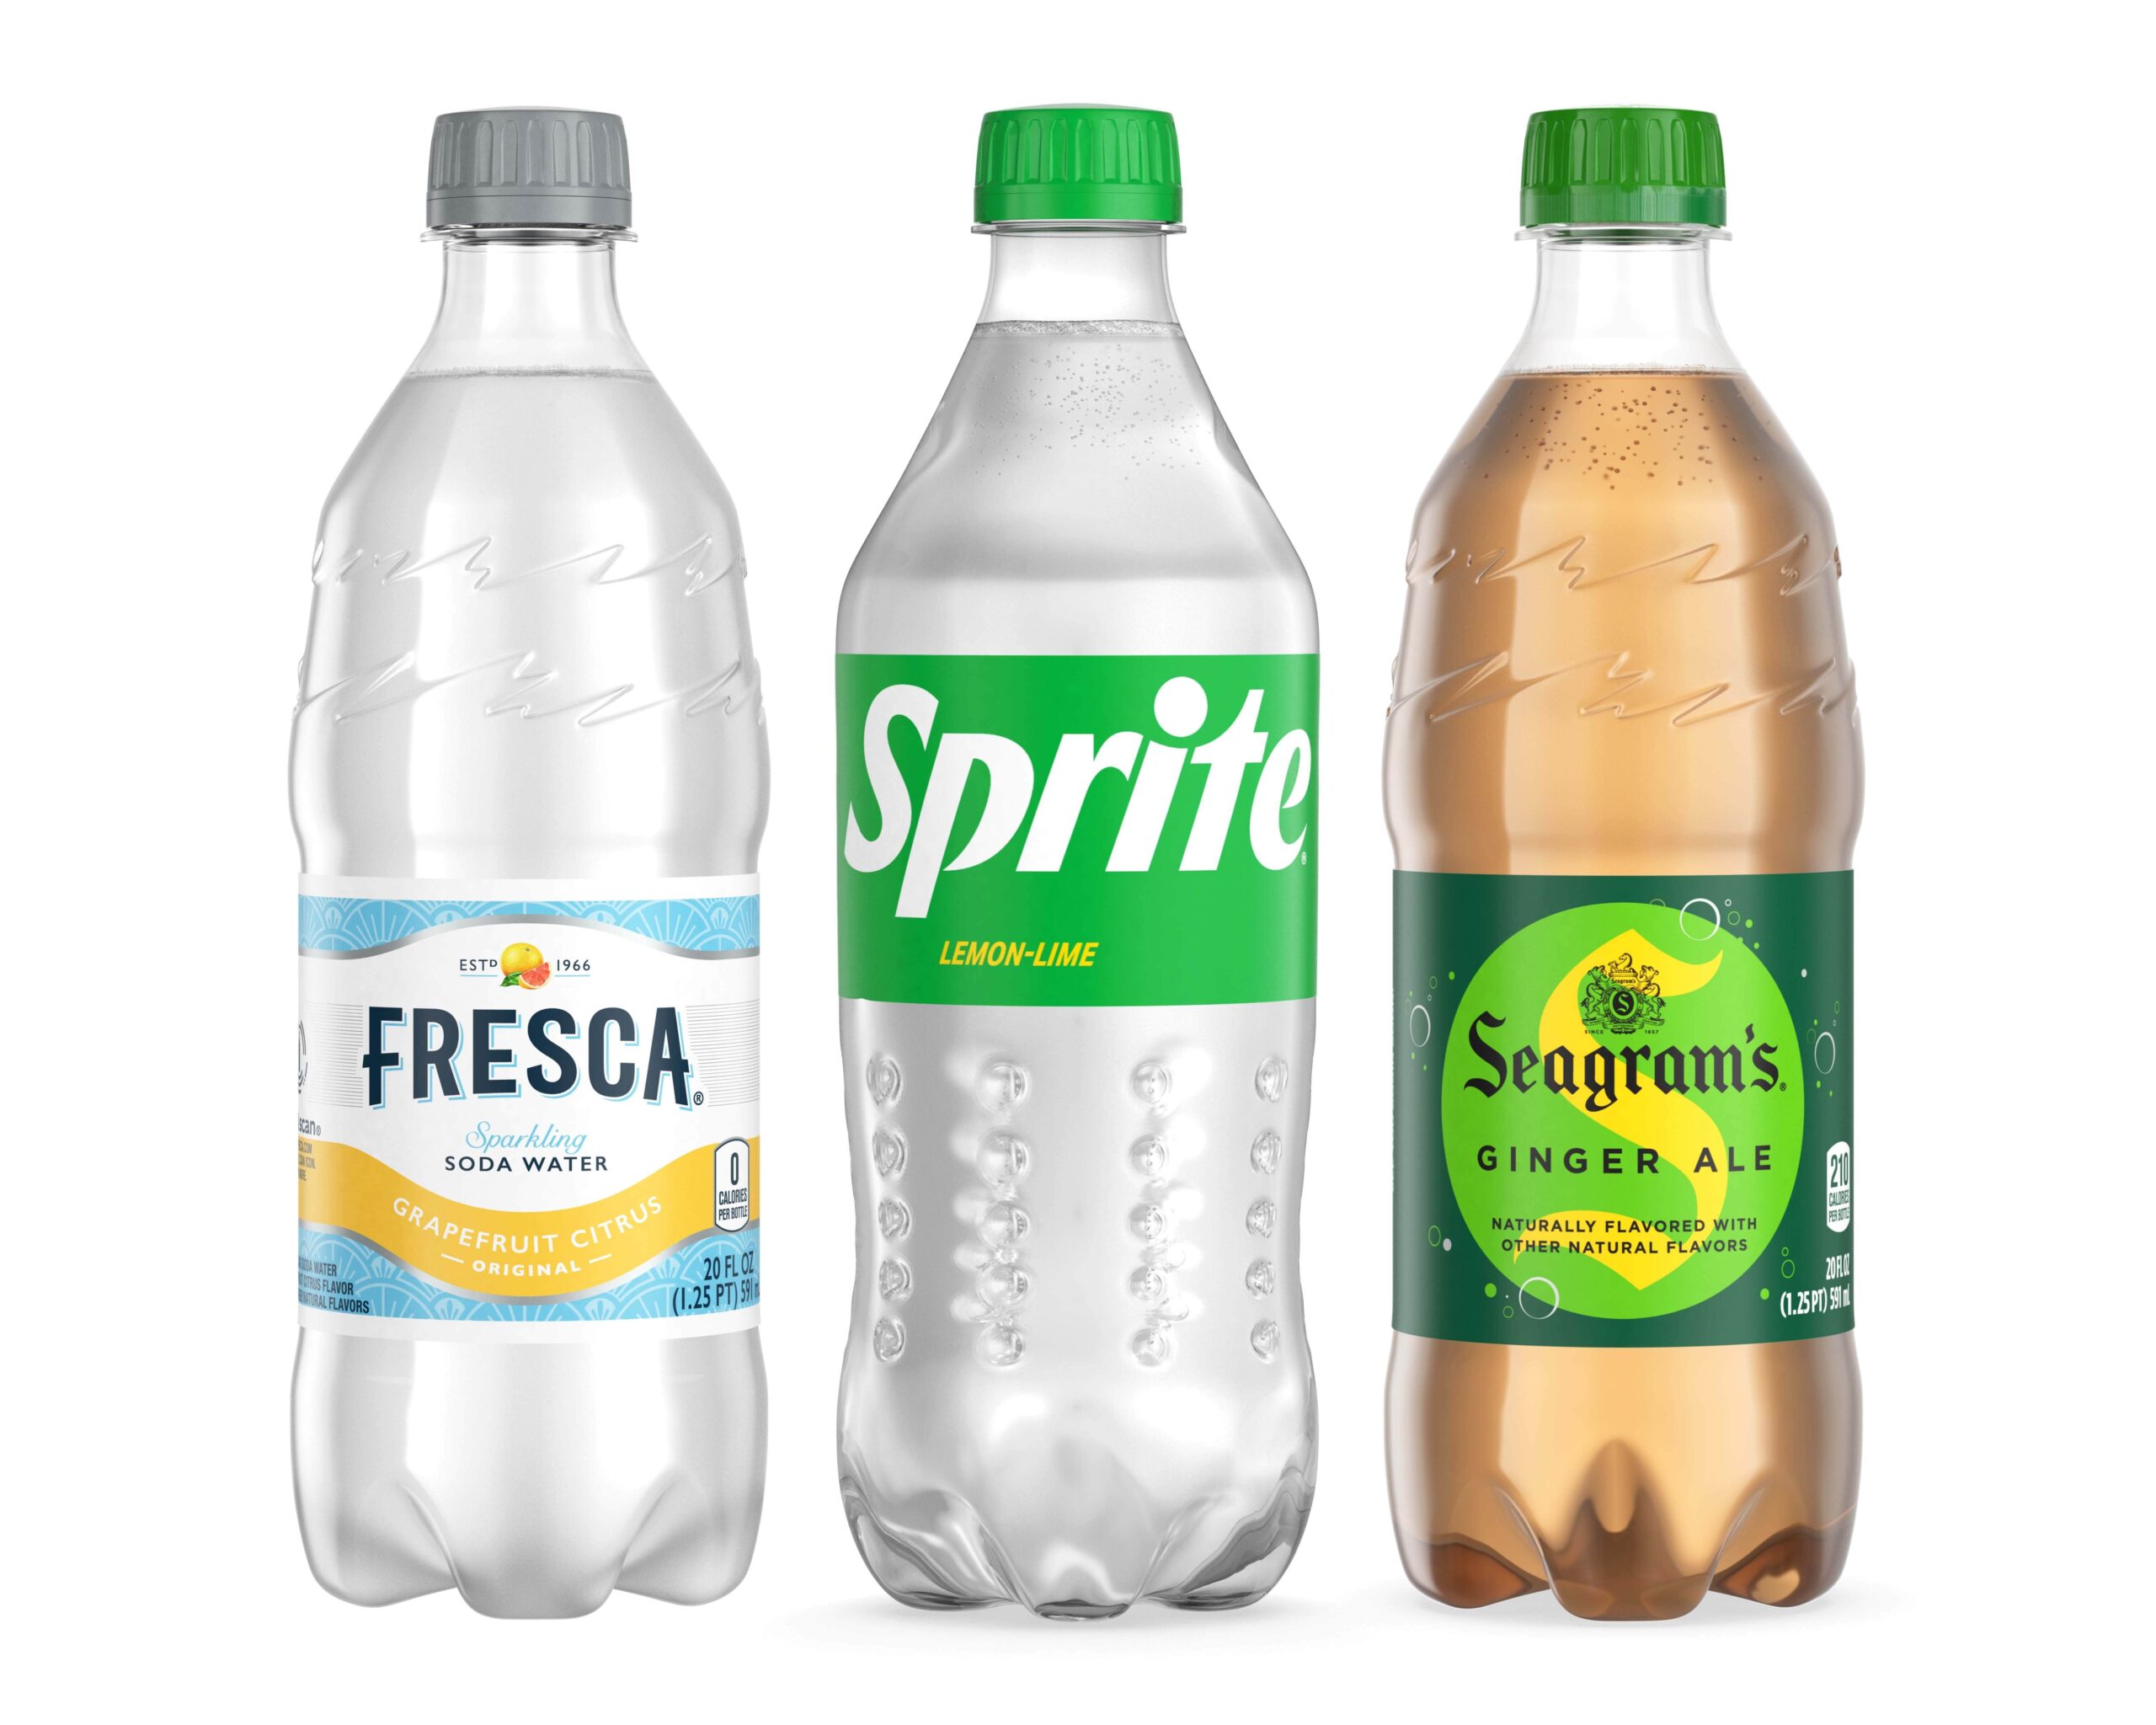 The Coca-Cola Company has teamed up with music legends Mark Ronson & Madlib for new sustainability campaign Recycled Records, to celebrate Sprite, Fresca, and Seagram’s transition from green to clear packaging. Photo Credit: The Coca-Cola Company